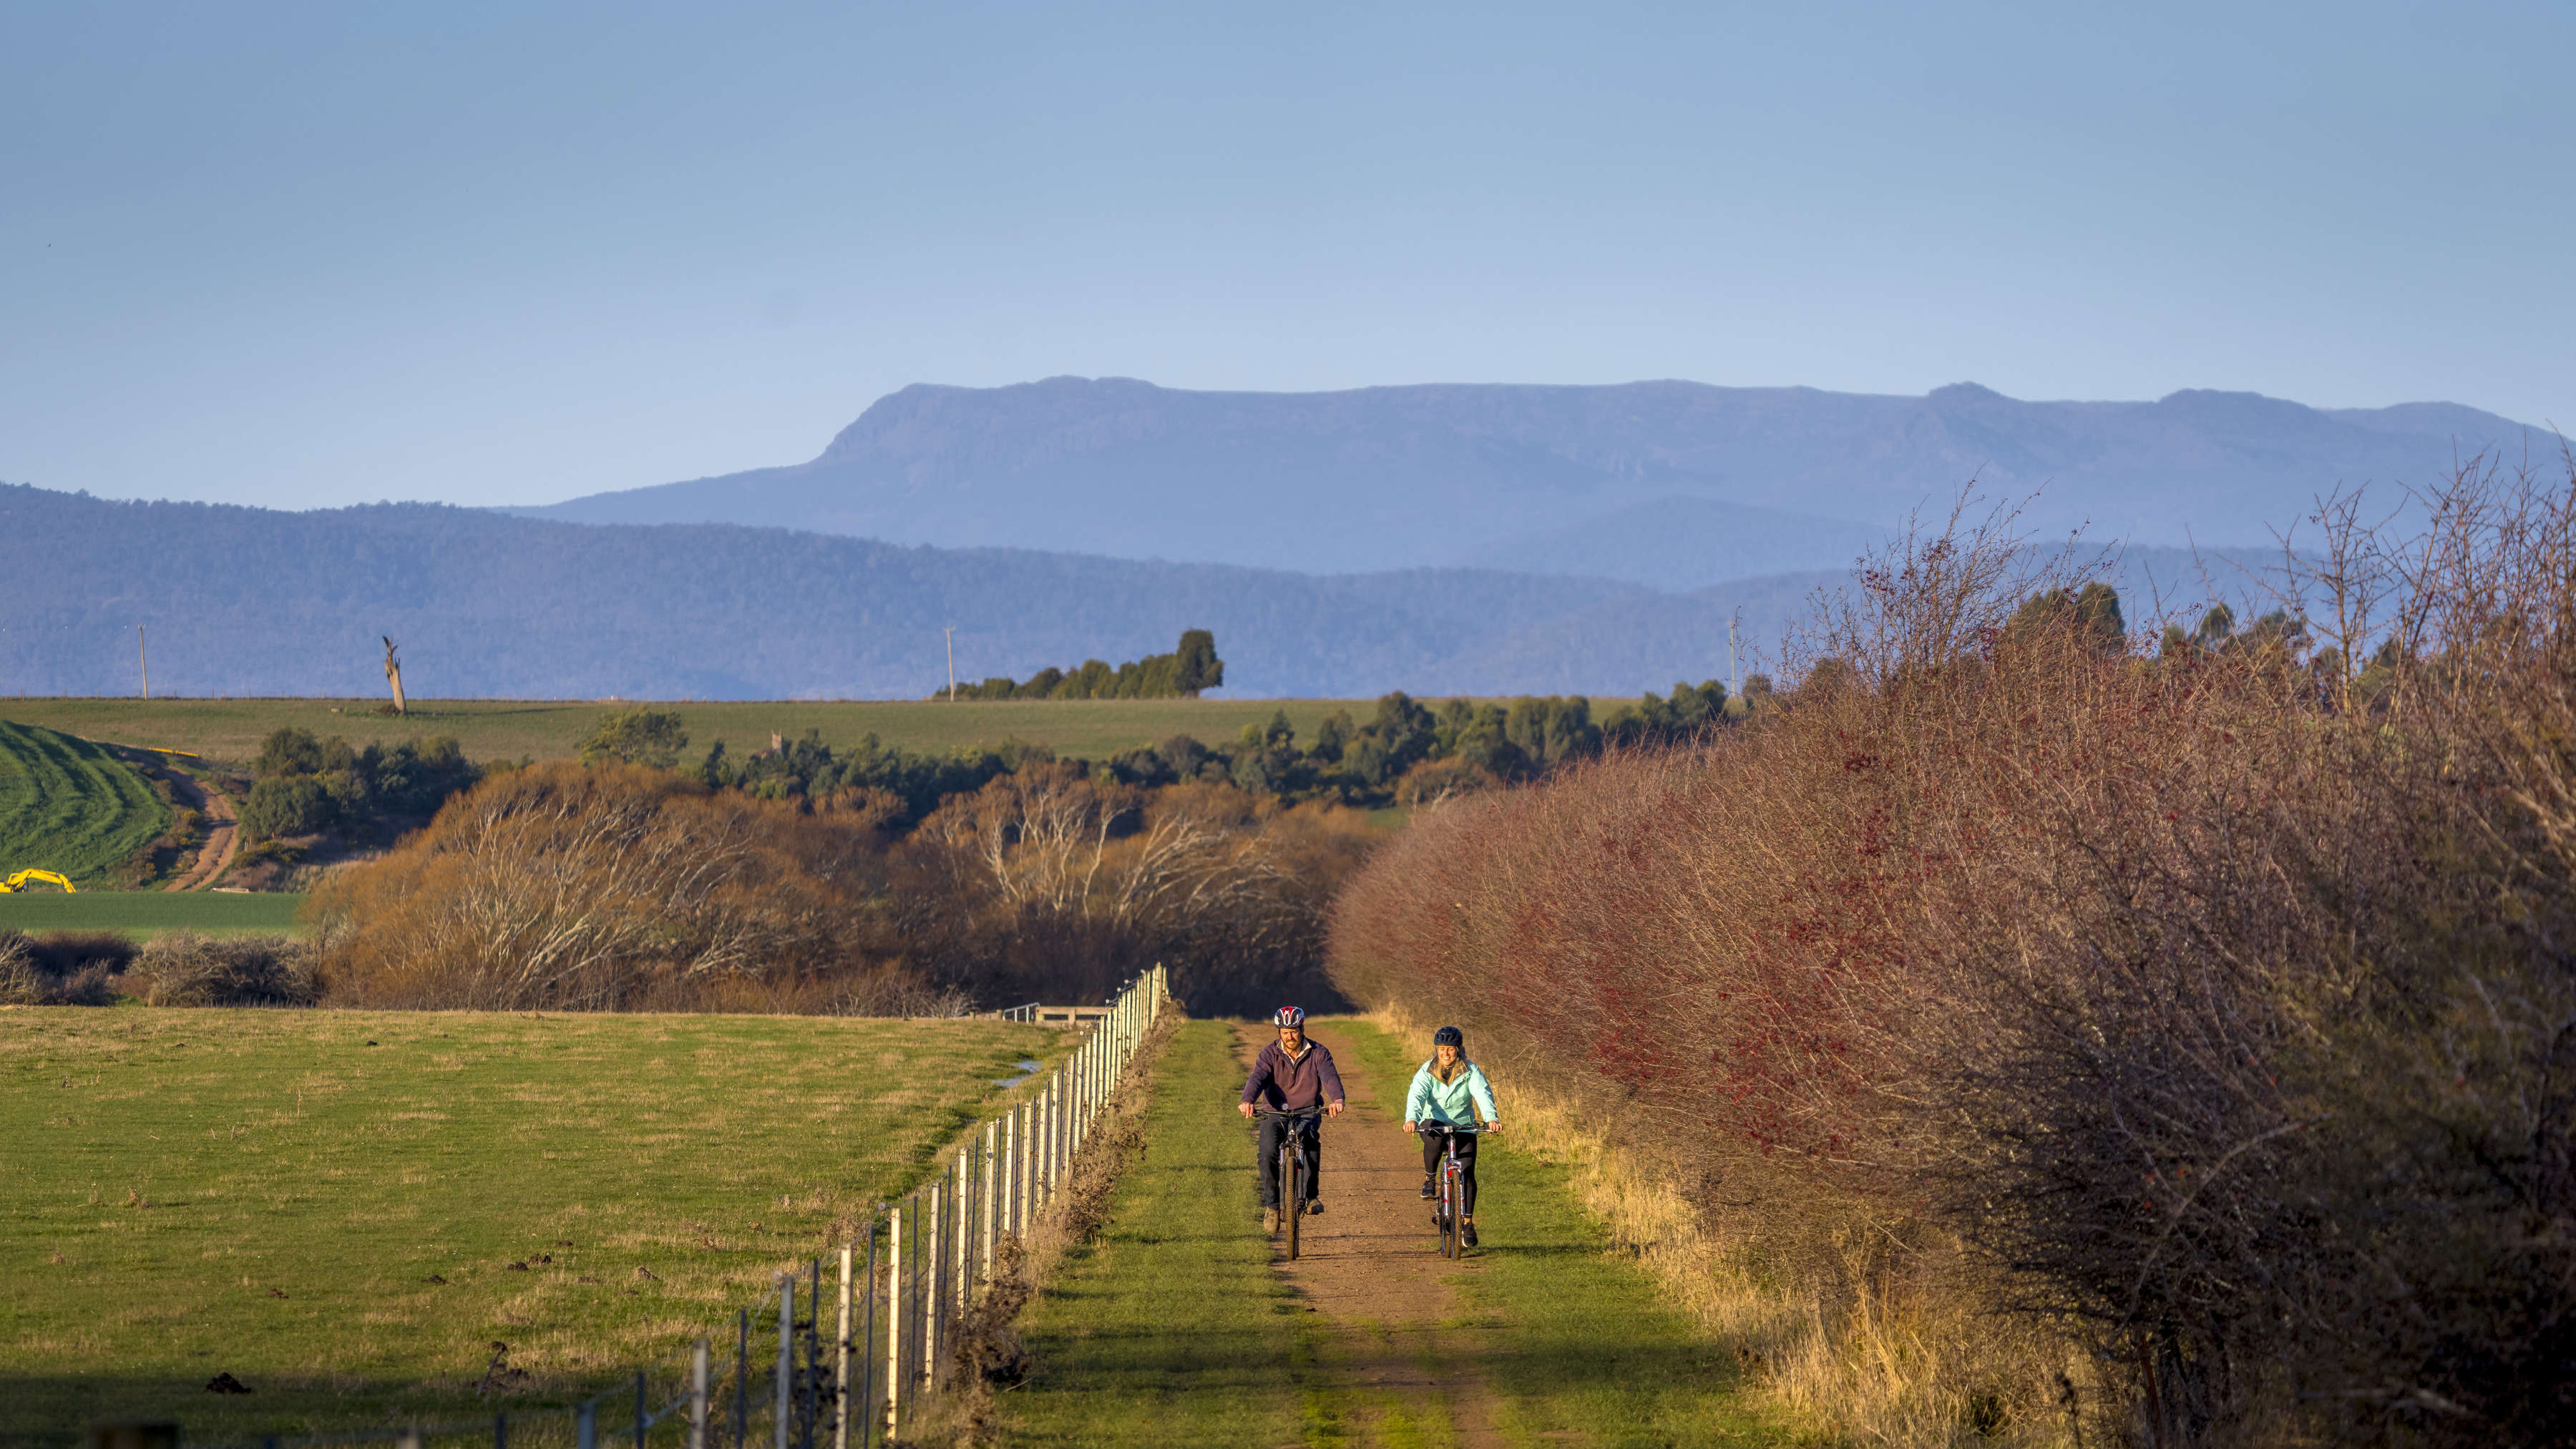 Two cyclists ride along the Convict Trail beside a hawthorn hedge. Rolling hills and Ben Lomond mountain are in the background. The hedgerow has red berries as the image was taken in Autumn. Photo: Rob Burnett.